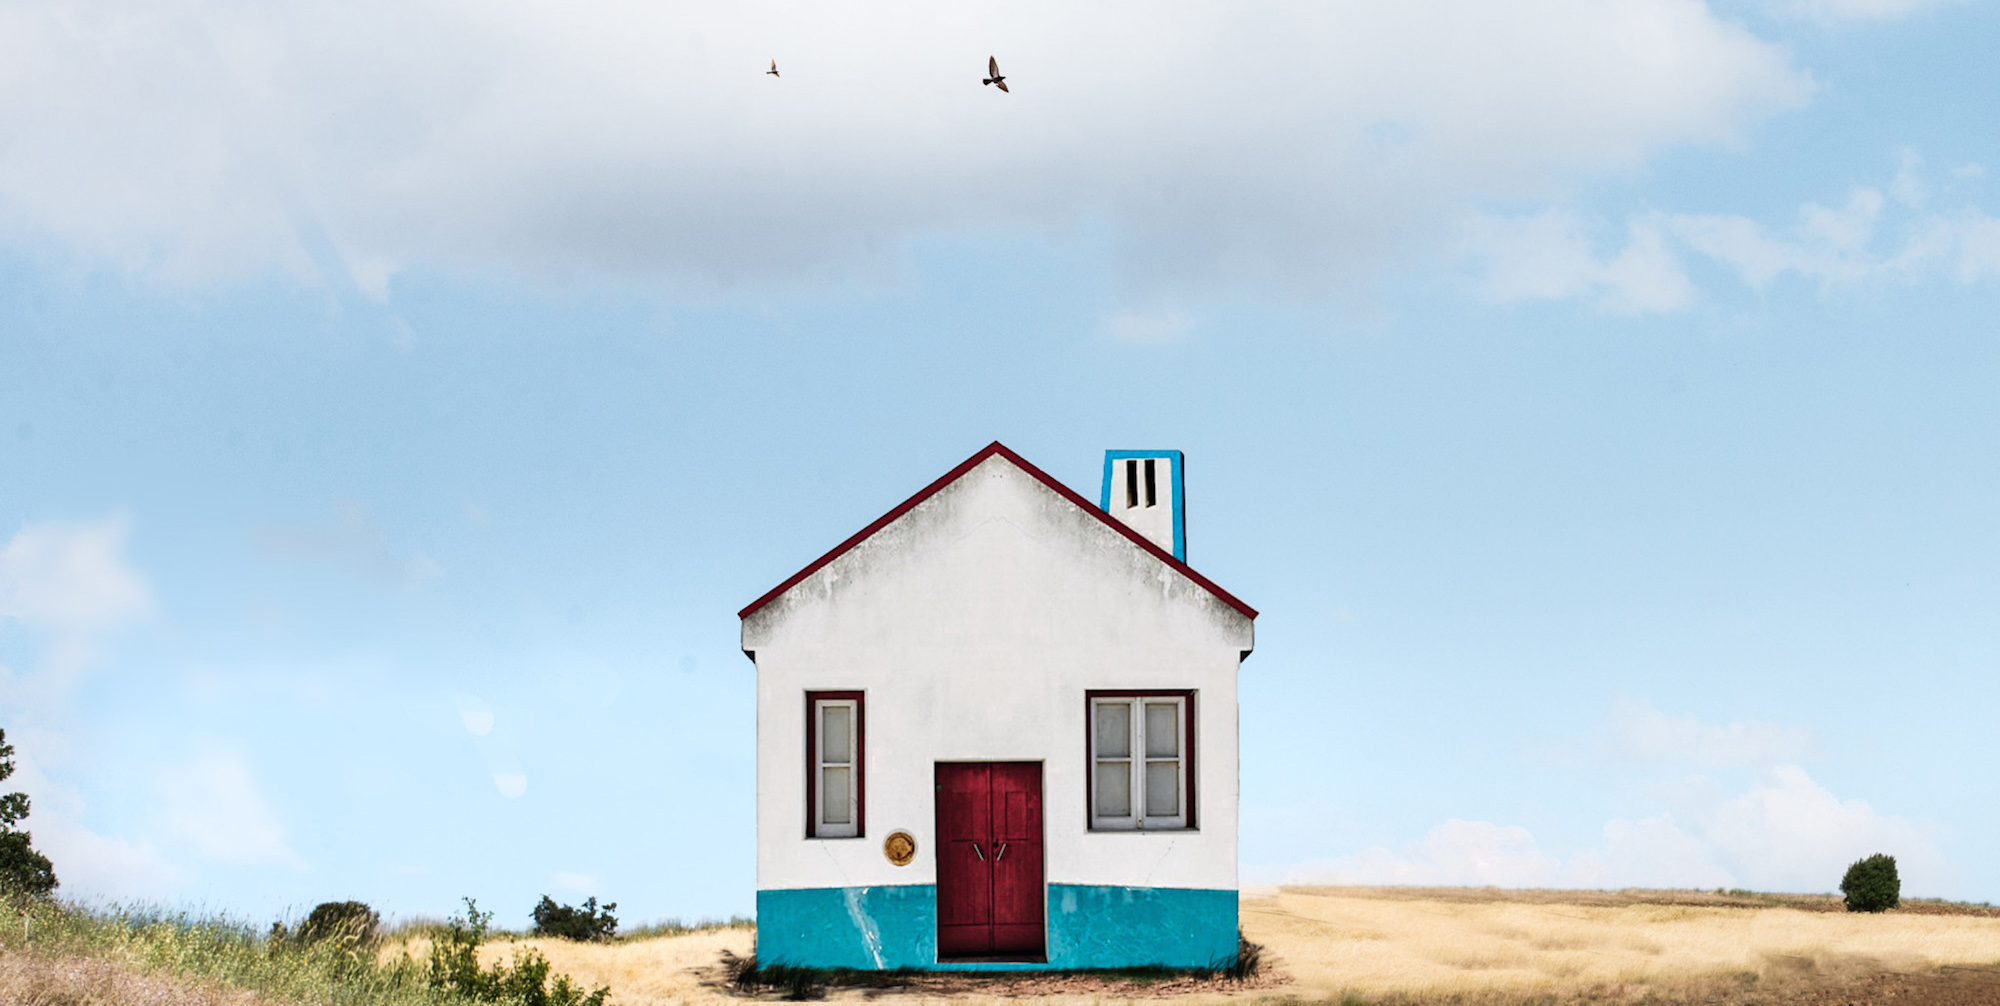 lonely houses photographic series by sejkko featured